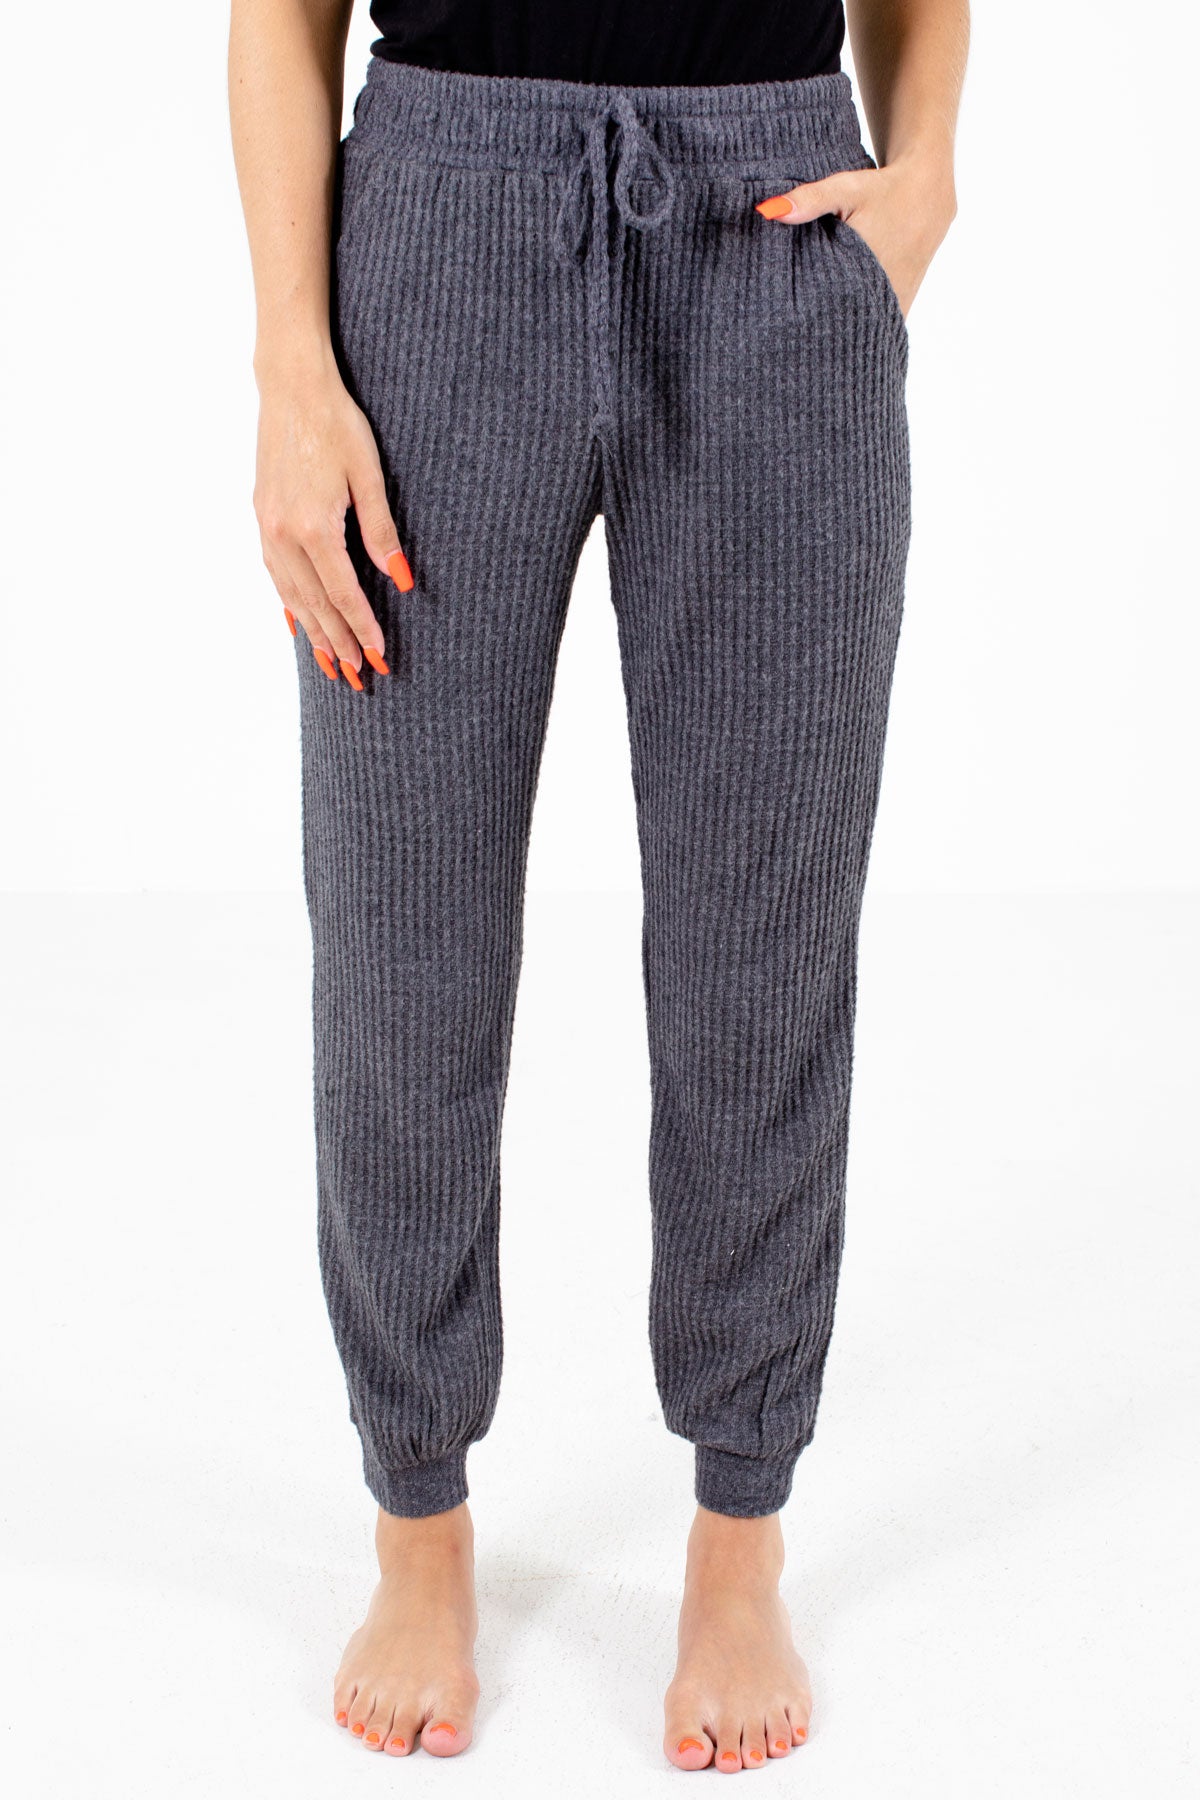 Women's Striped Perfectly Cozy Lounge Jogger Pants